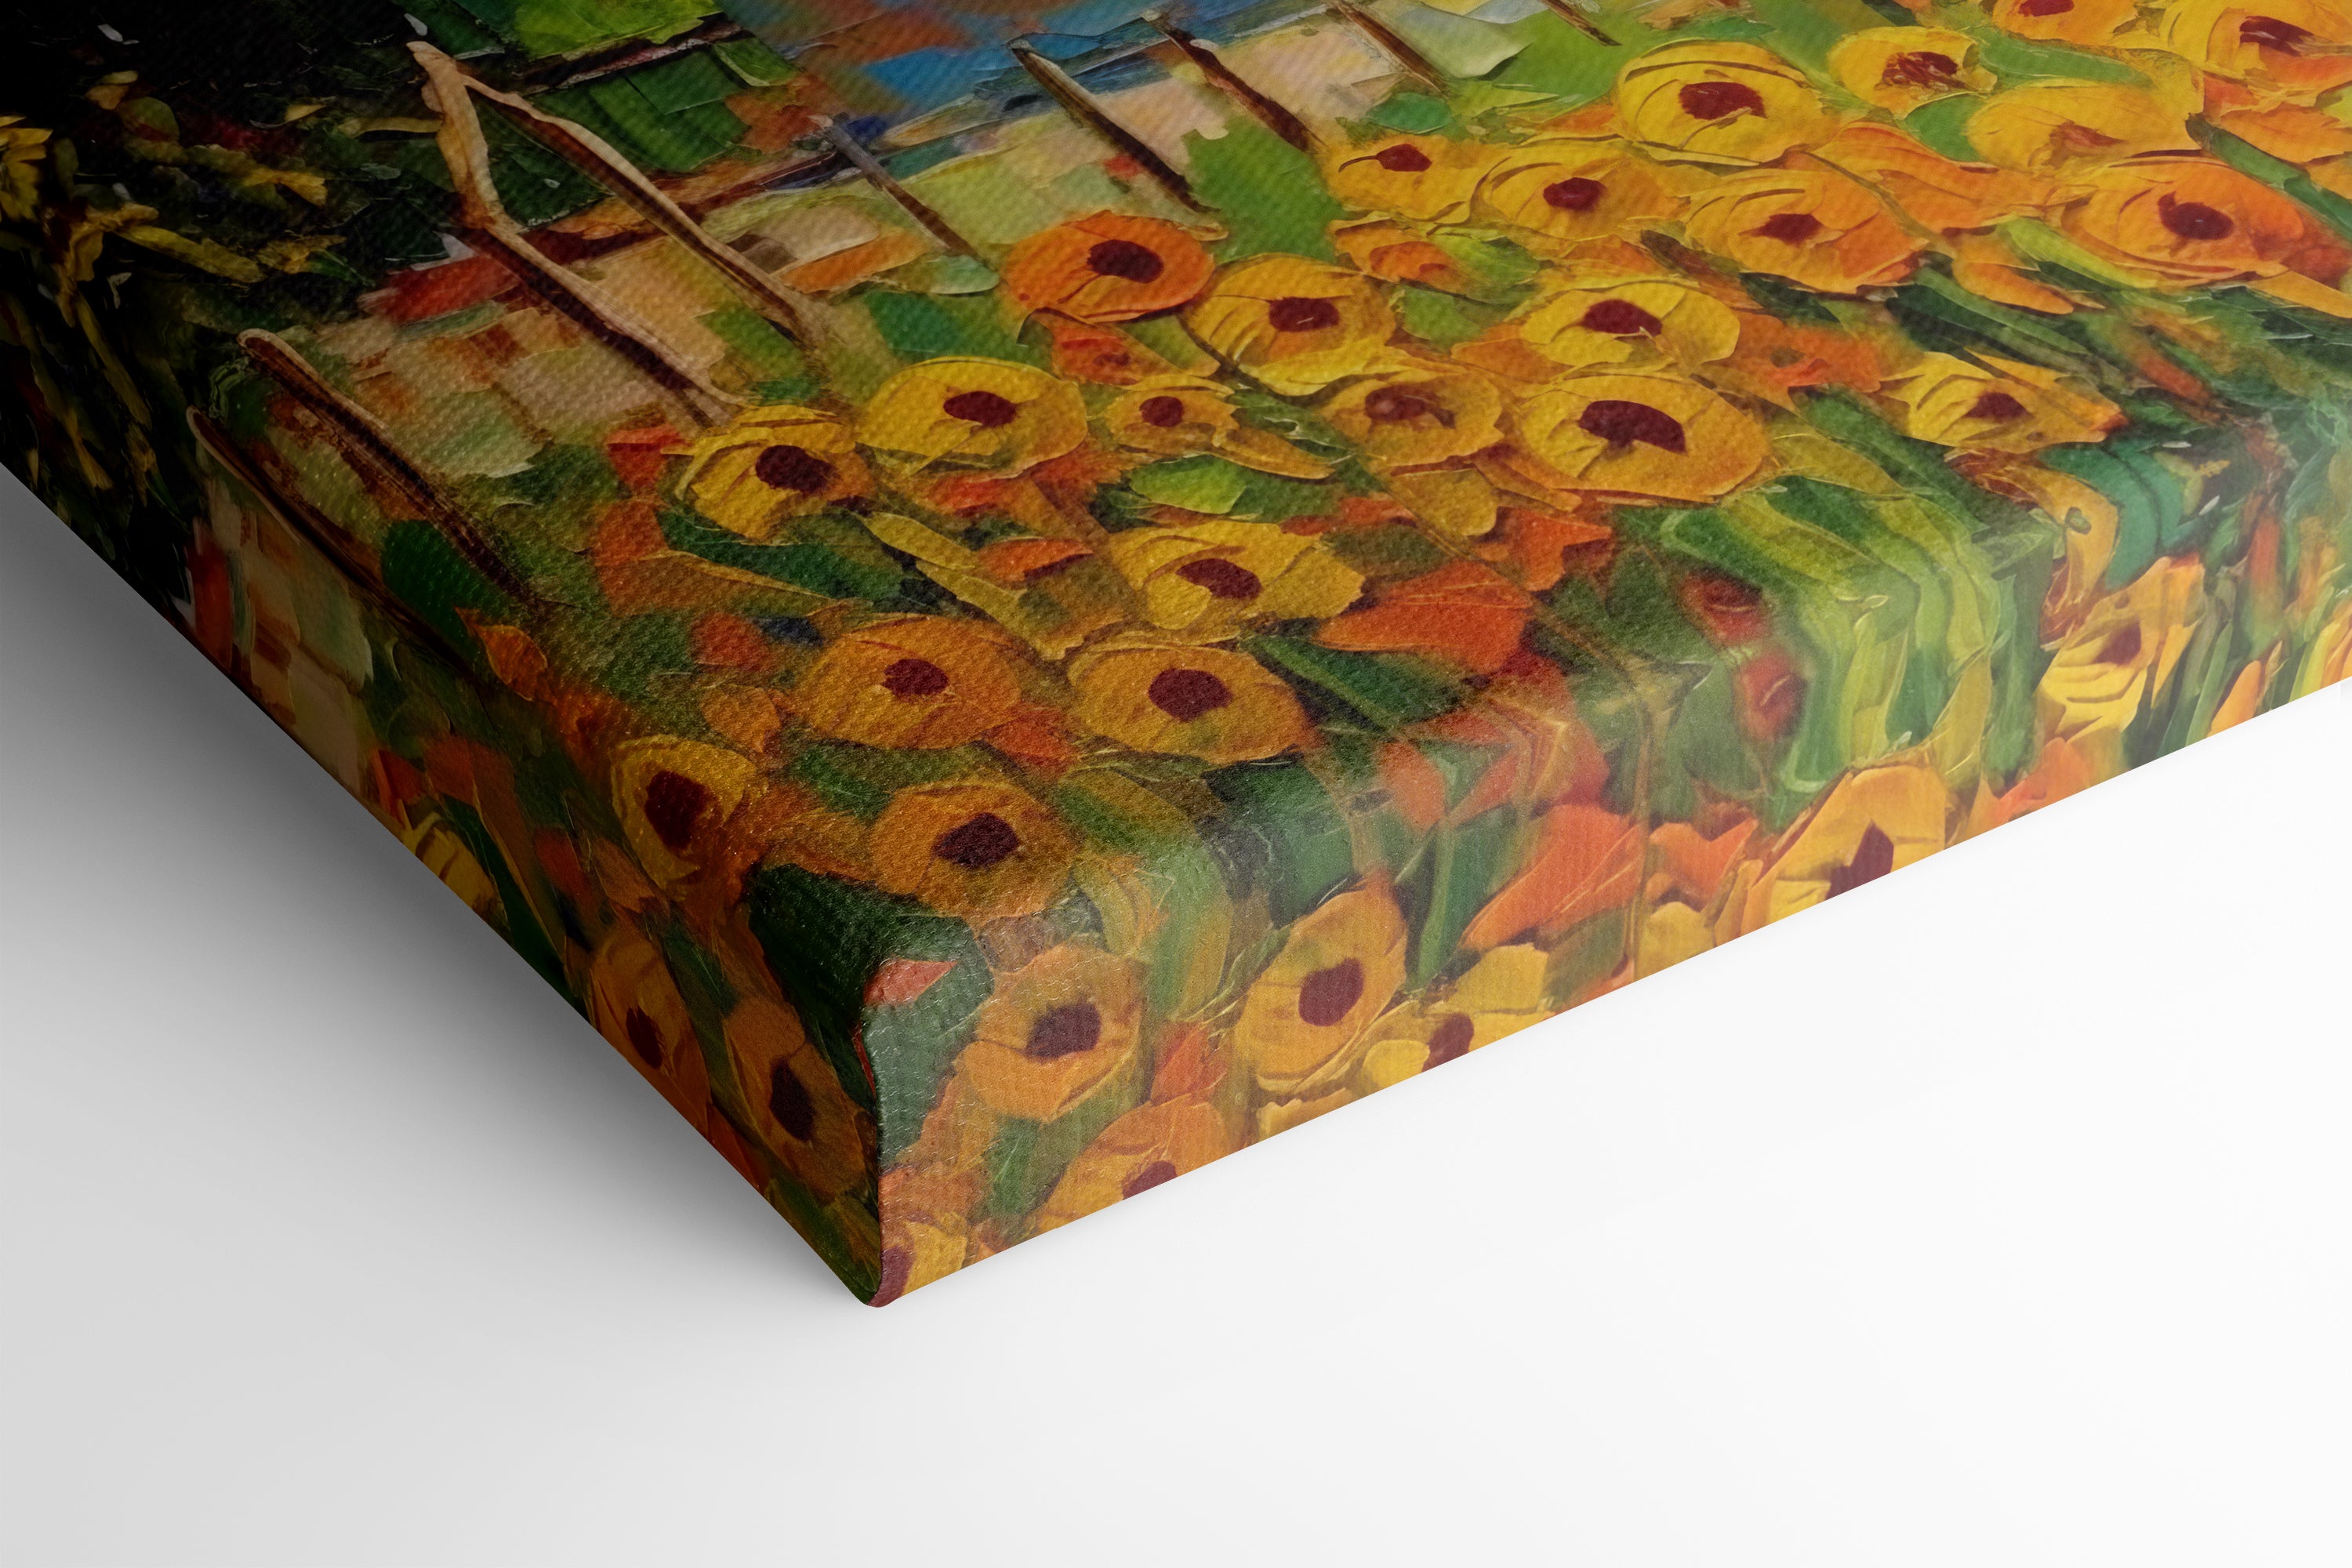 Old-Style House with Sunflower Garden - Canvas Print - Artoholica Ready to Hang Canvas Print